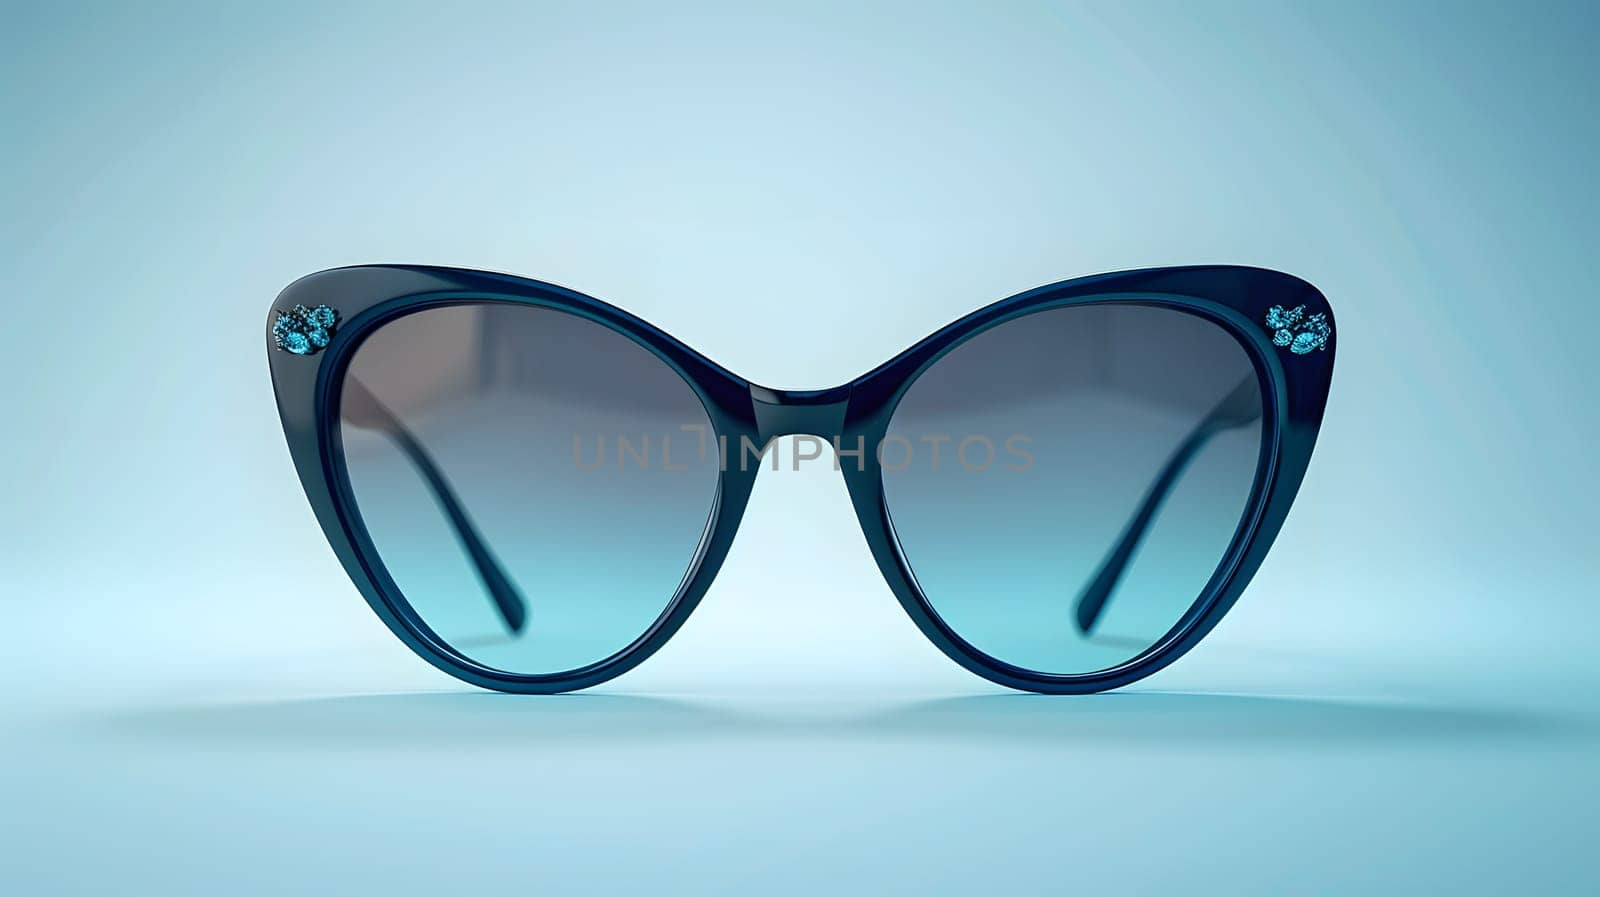 Cat eye sunglasses resting on a vibrant azure surface. These stylish glasses are a trendy eye glass accessory, perfect for adding a pop of color to your eyewear collection